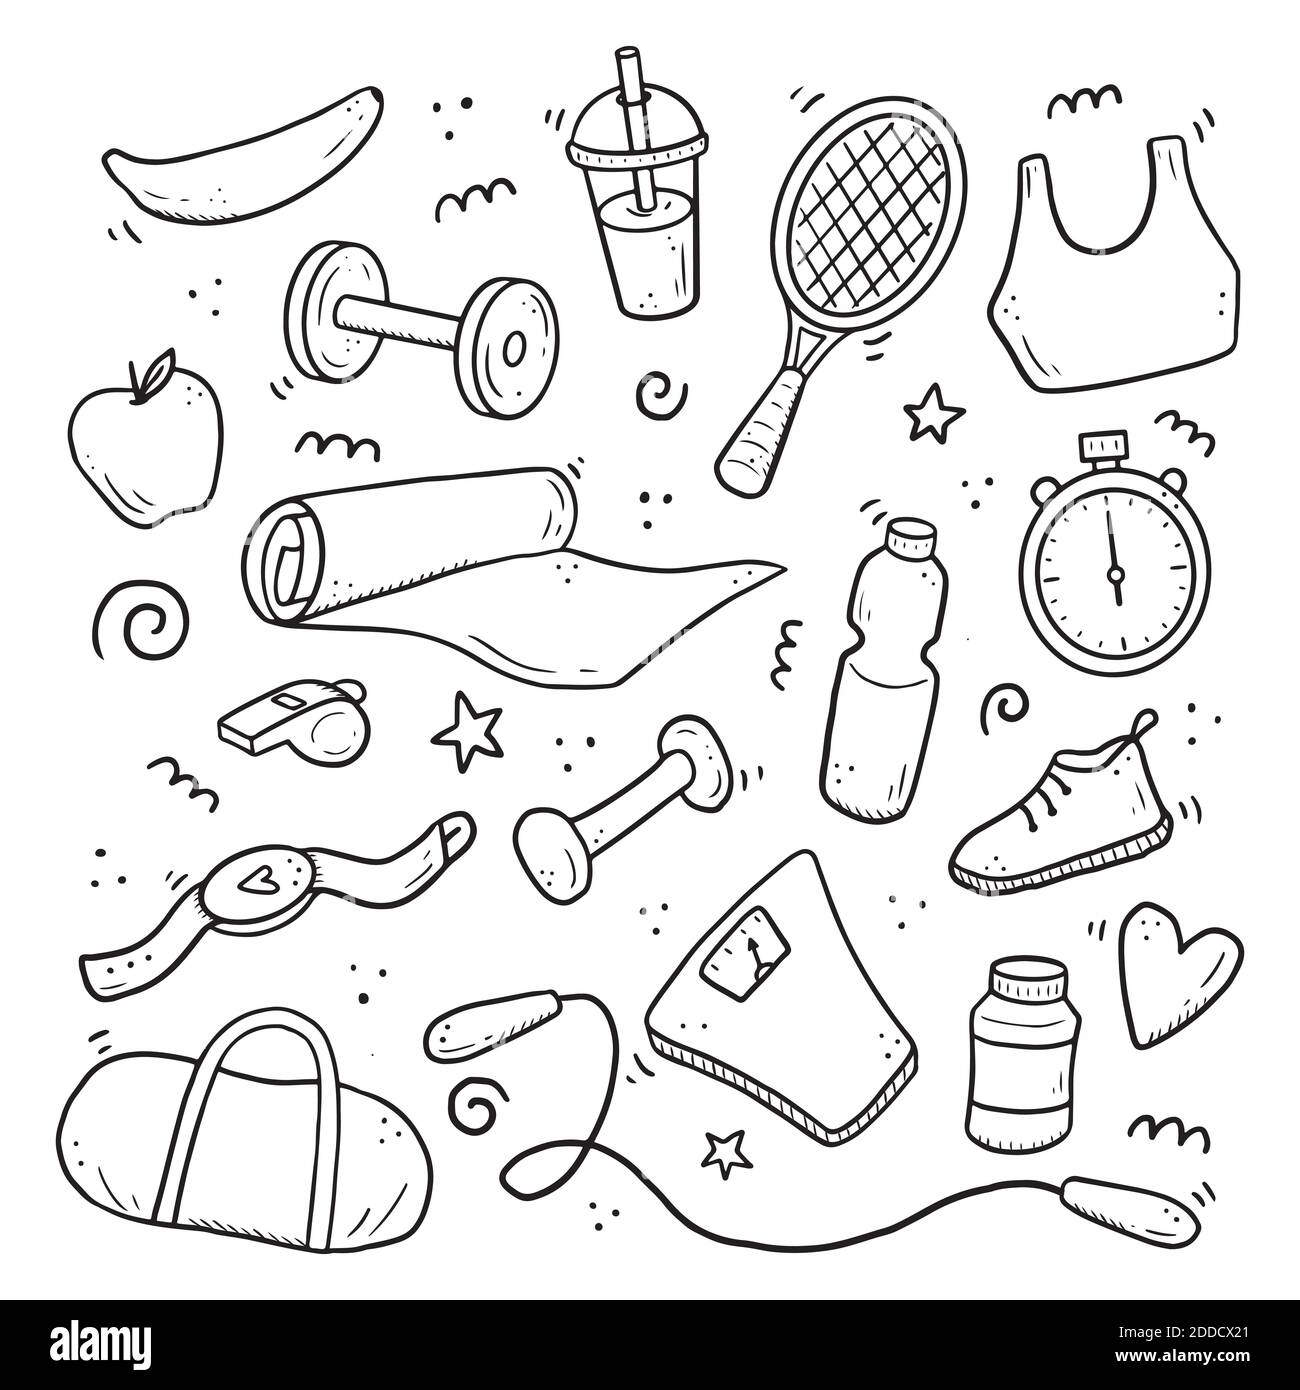 Fitness And Workout Related Objects And Elements Hand Drawn